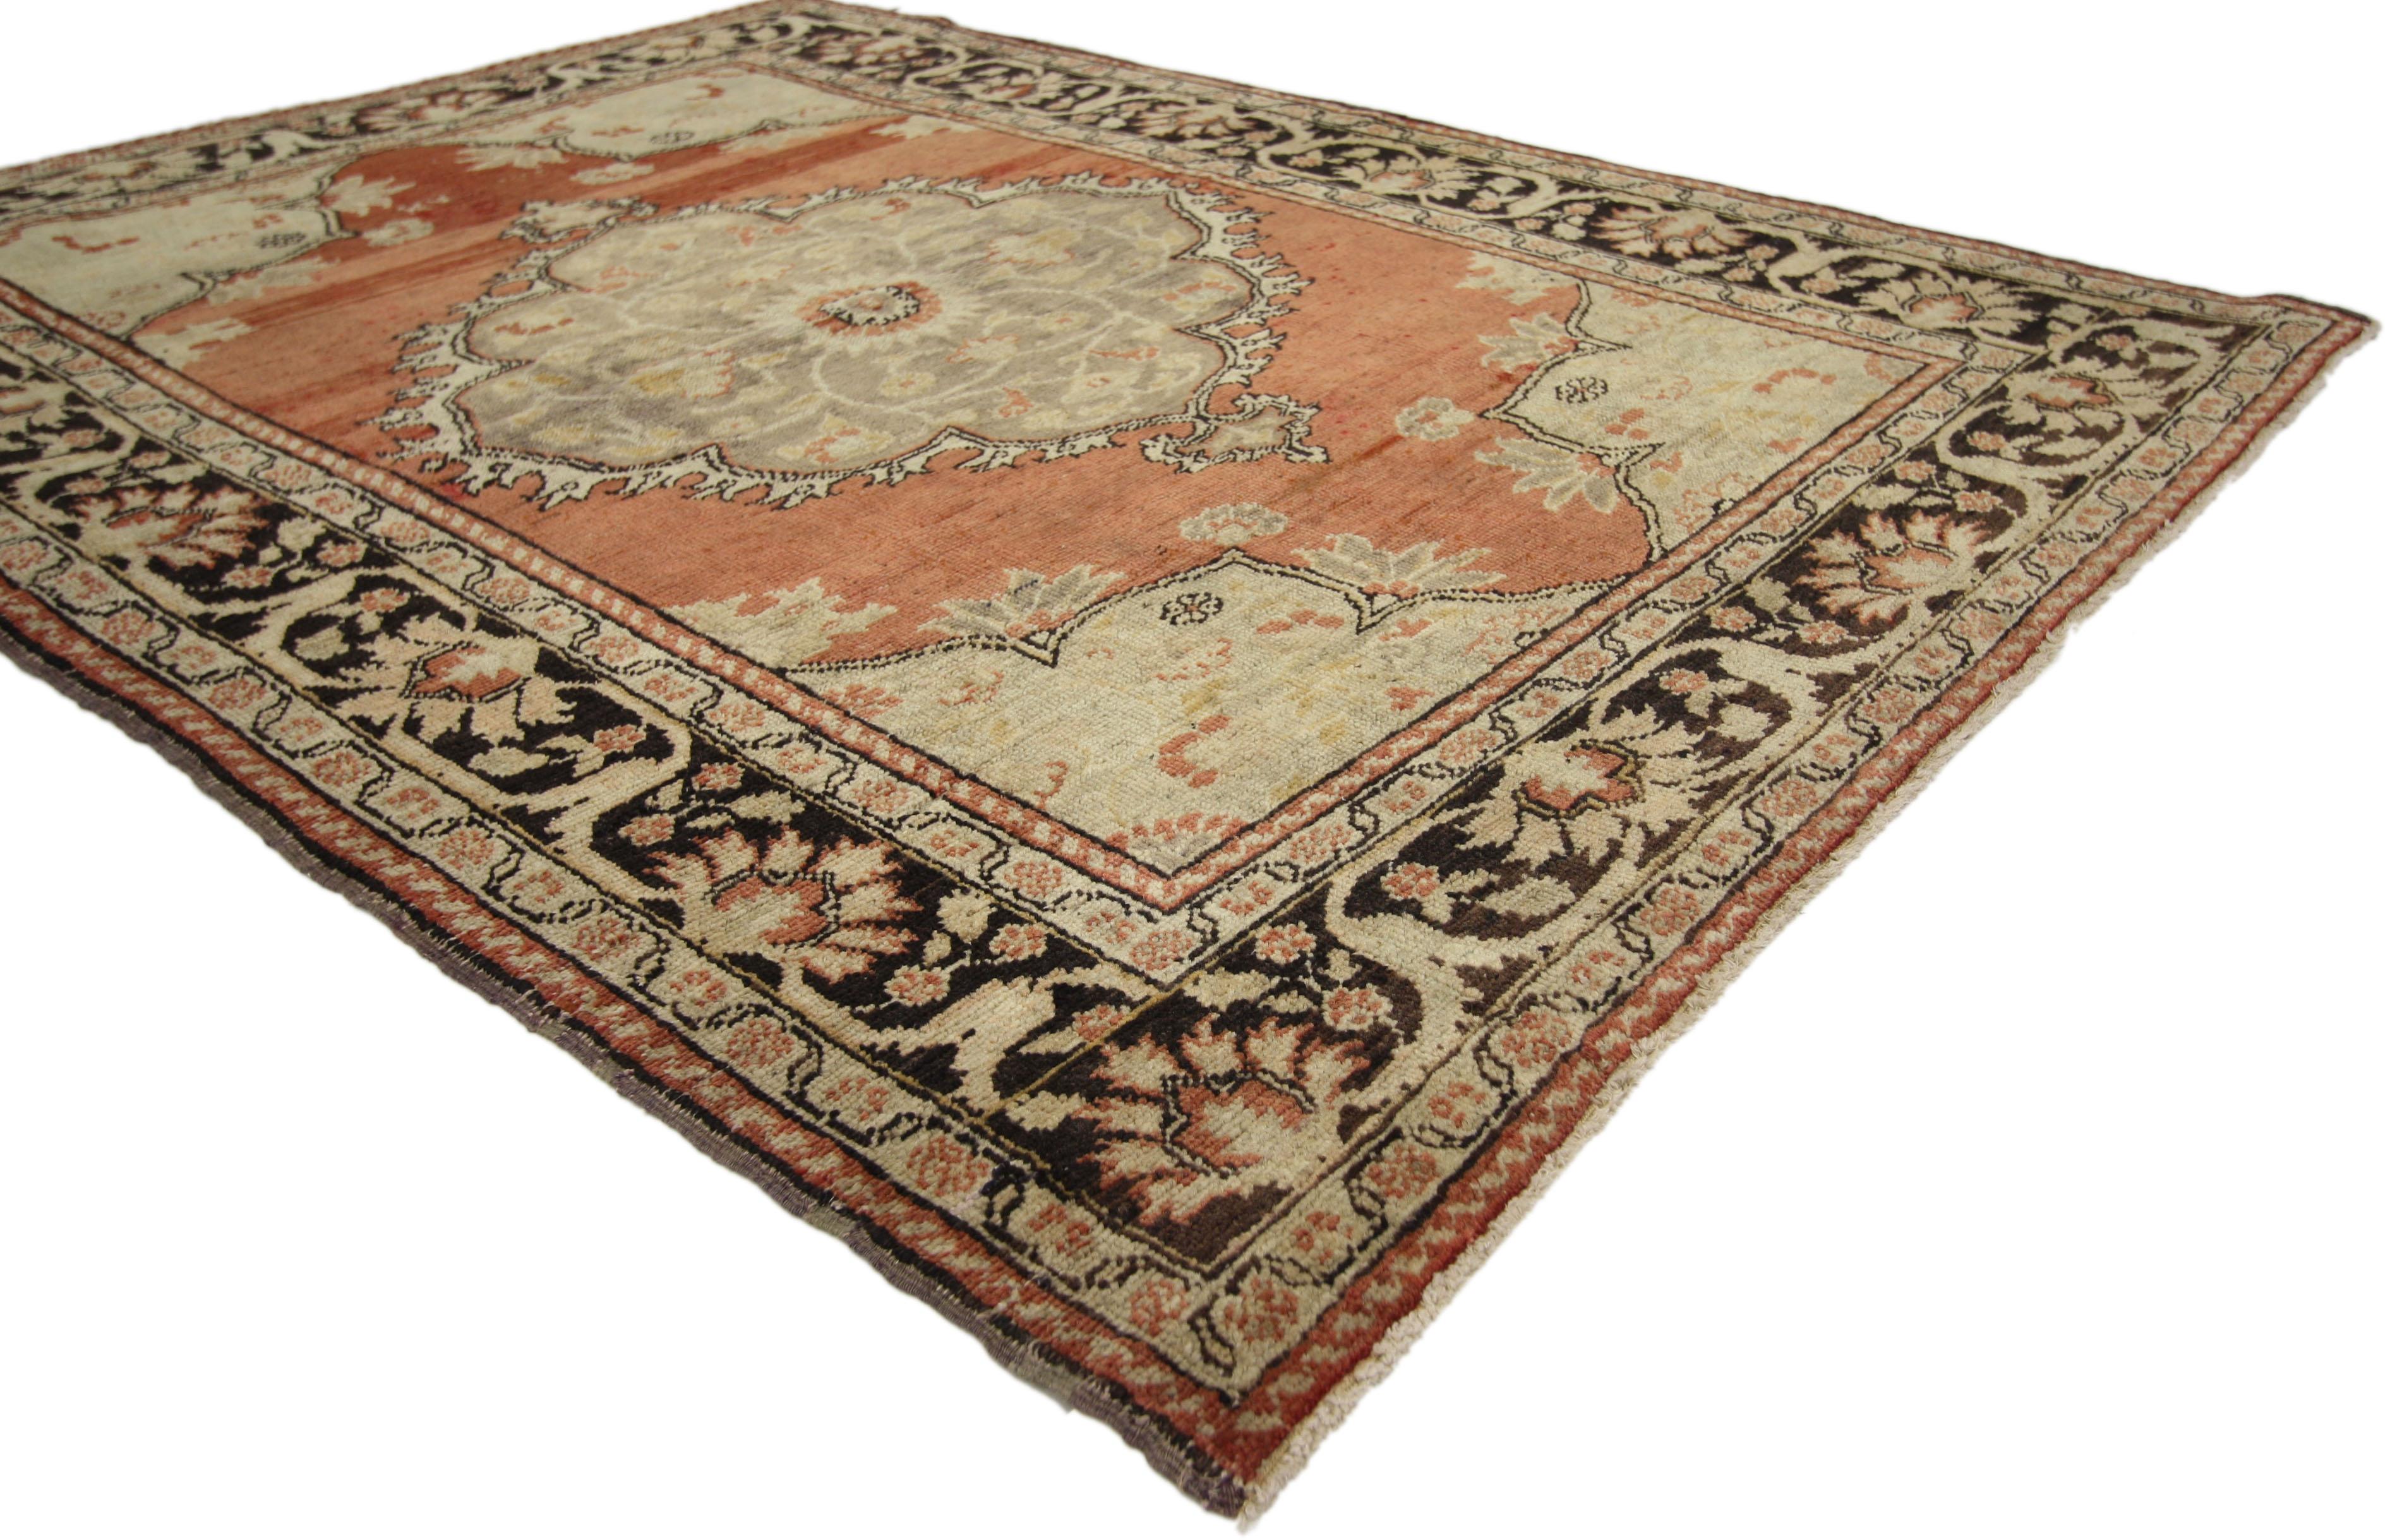 50632, Vintage Turkish Oushak Accent Rug with Rustic Bungalow Style. This luxurious traditional style Oushak rug features a classic medallion and corner motif. The intricate medallion in rendered in taupe, tan and beige on a sea of abrashed rustic